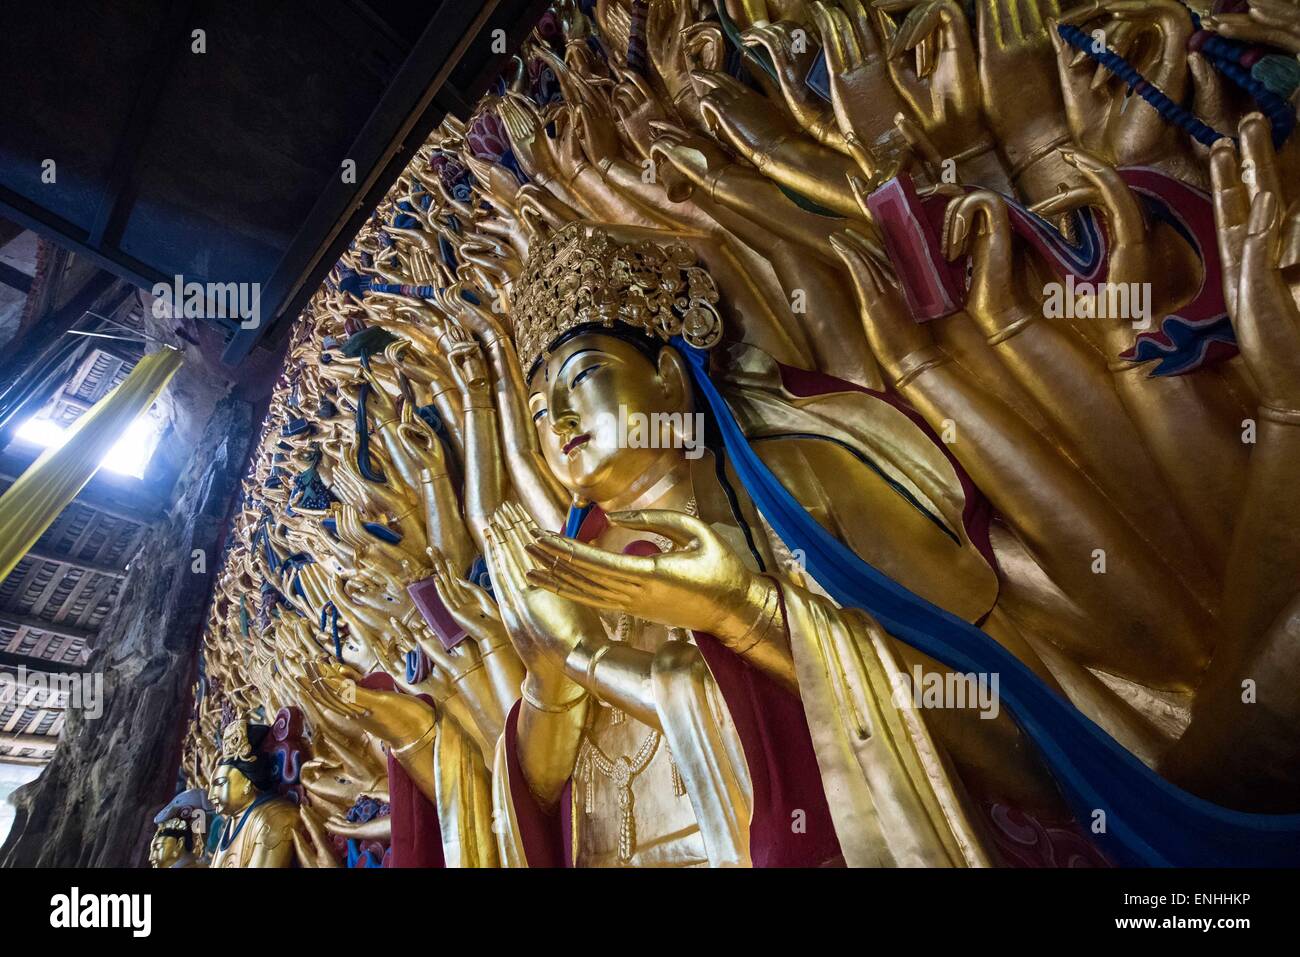 (150506) -- CHONGQING, May 6, 2015 (Xinhua) -- Photo taken on May 5, 2015 shows the restored statue of Qianshou Guanyin (bodhisattva with a thousand hands) on Mount Baoding in Dazu District, southwest China's Chongqing. The statue with gold foil, carved in the cave with 7.7 meters high and 12.5 meters wide, could date back to Southern Song Dynasty (1127 to 1279). The restoration work has been completed and accepted by experts from administration of cultural heritage, colleges and academies on May 6. The statue will be reopened to public on June 13, which is also the Chinese 'Cultural Heritage Stock Photo